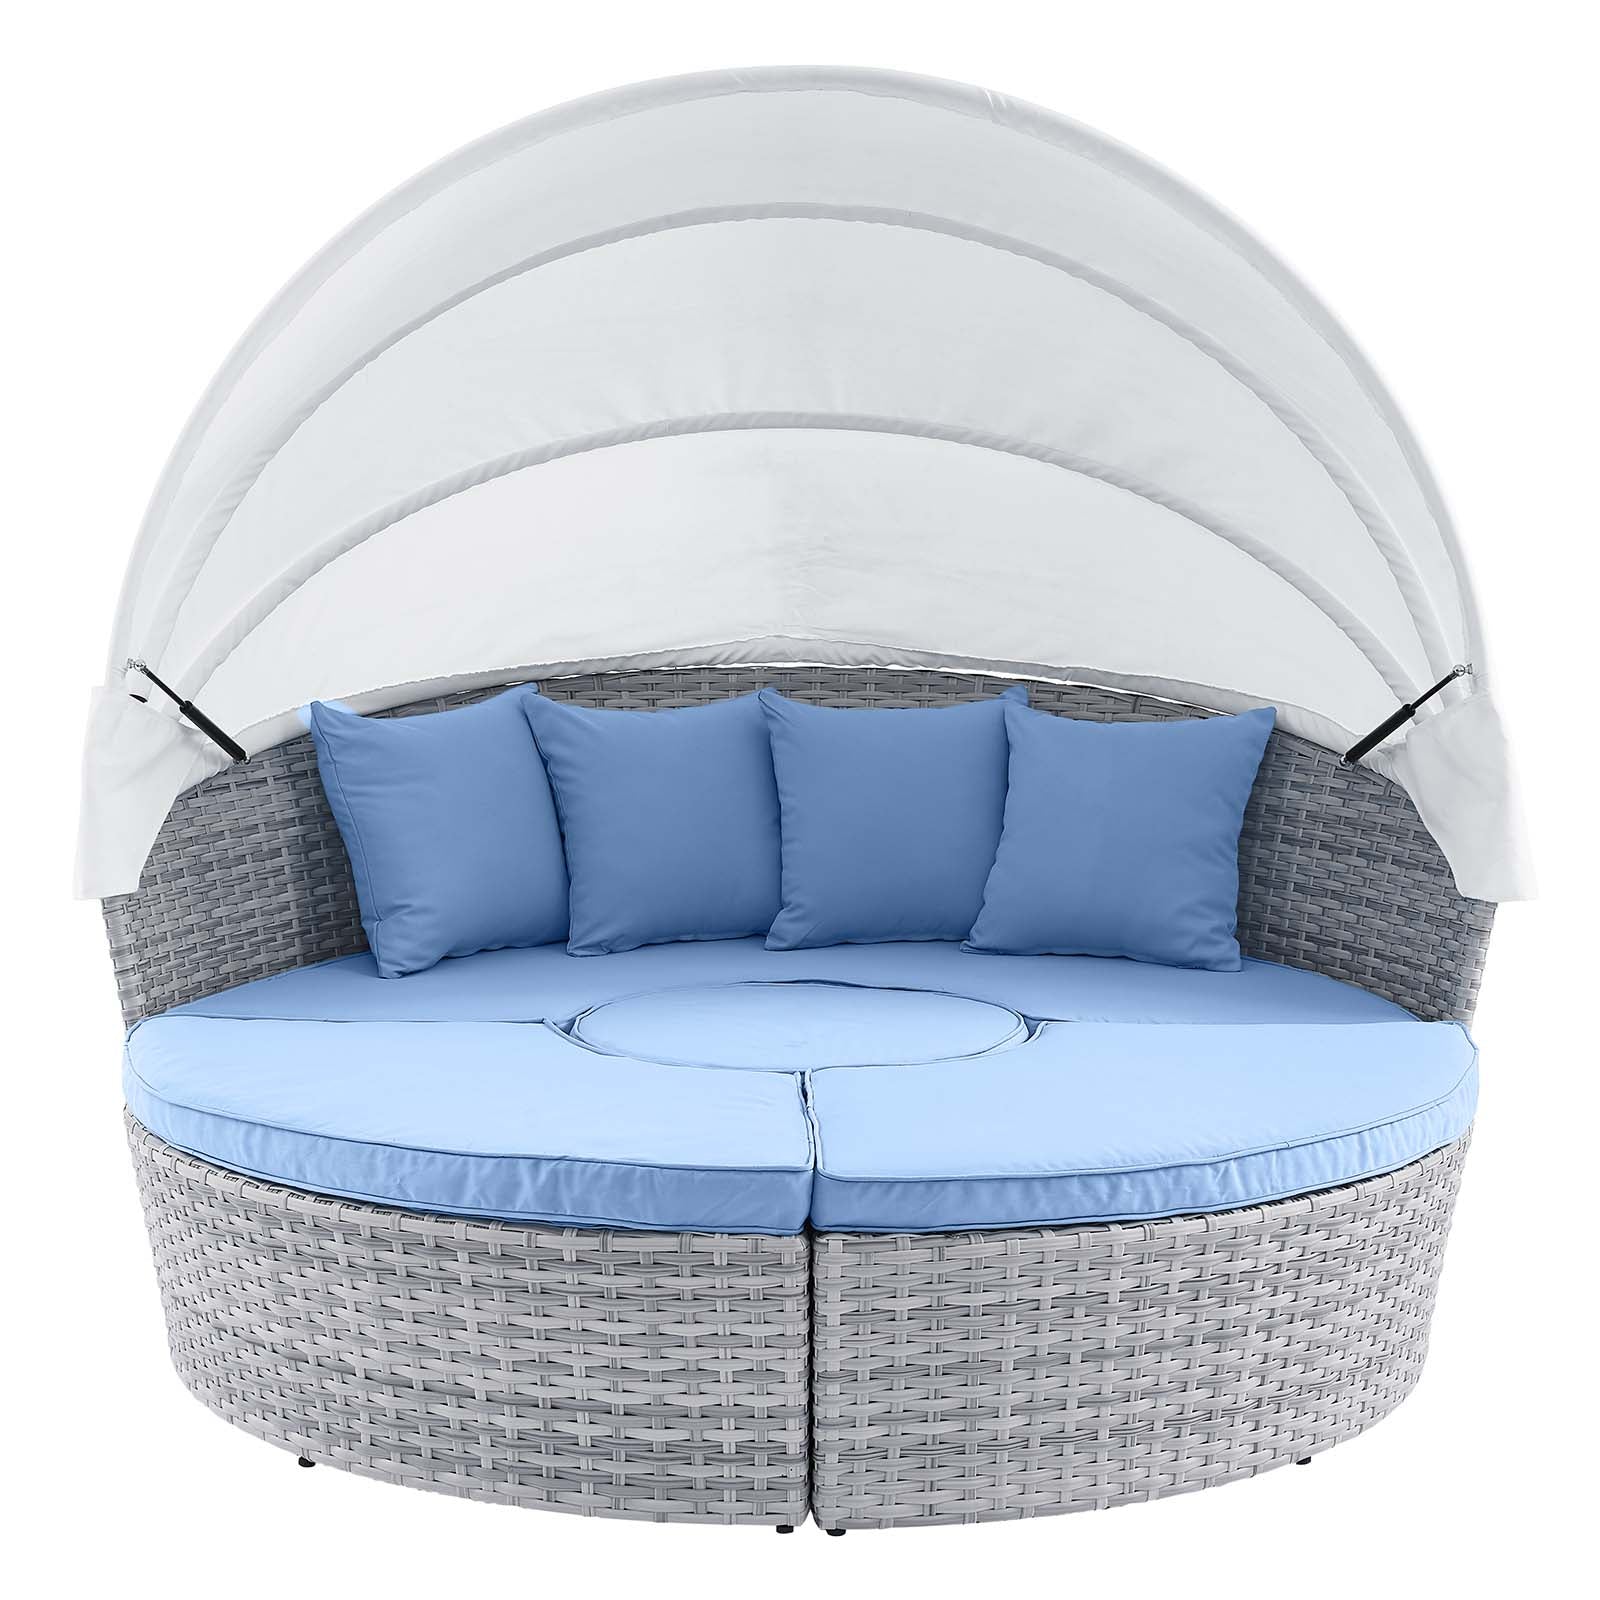 Modway Patio Daybeds - Scottsdale Canopy Outdoor Patio Daybed Light Gray Light Blue